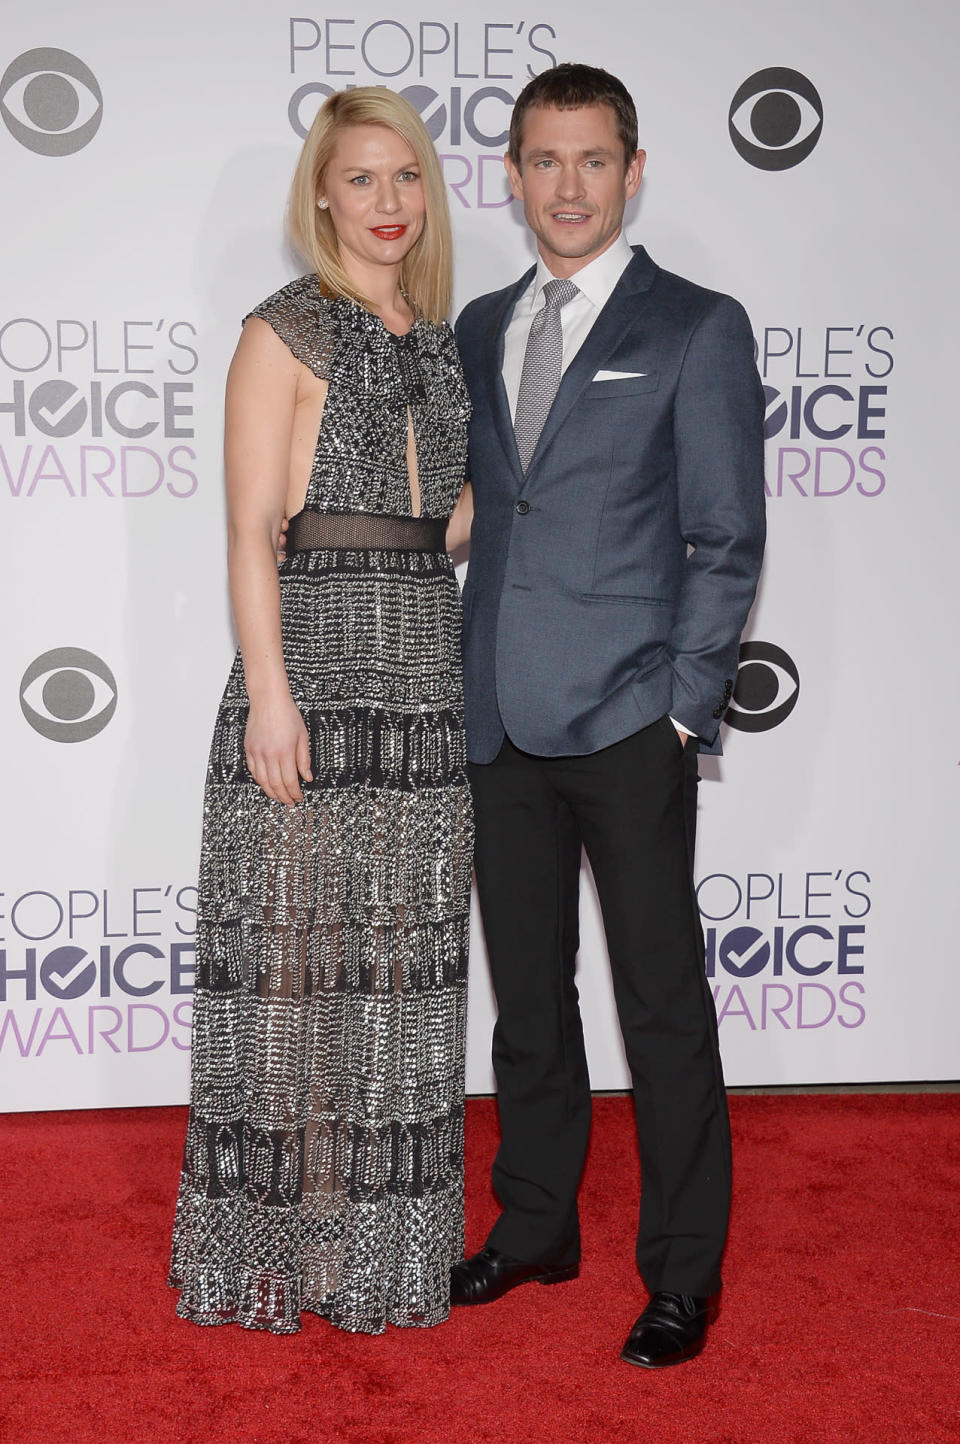 Claire Danes and Hugh Dancy posed on the 2016 People’s Choice Awards red carpet